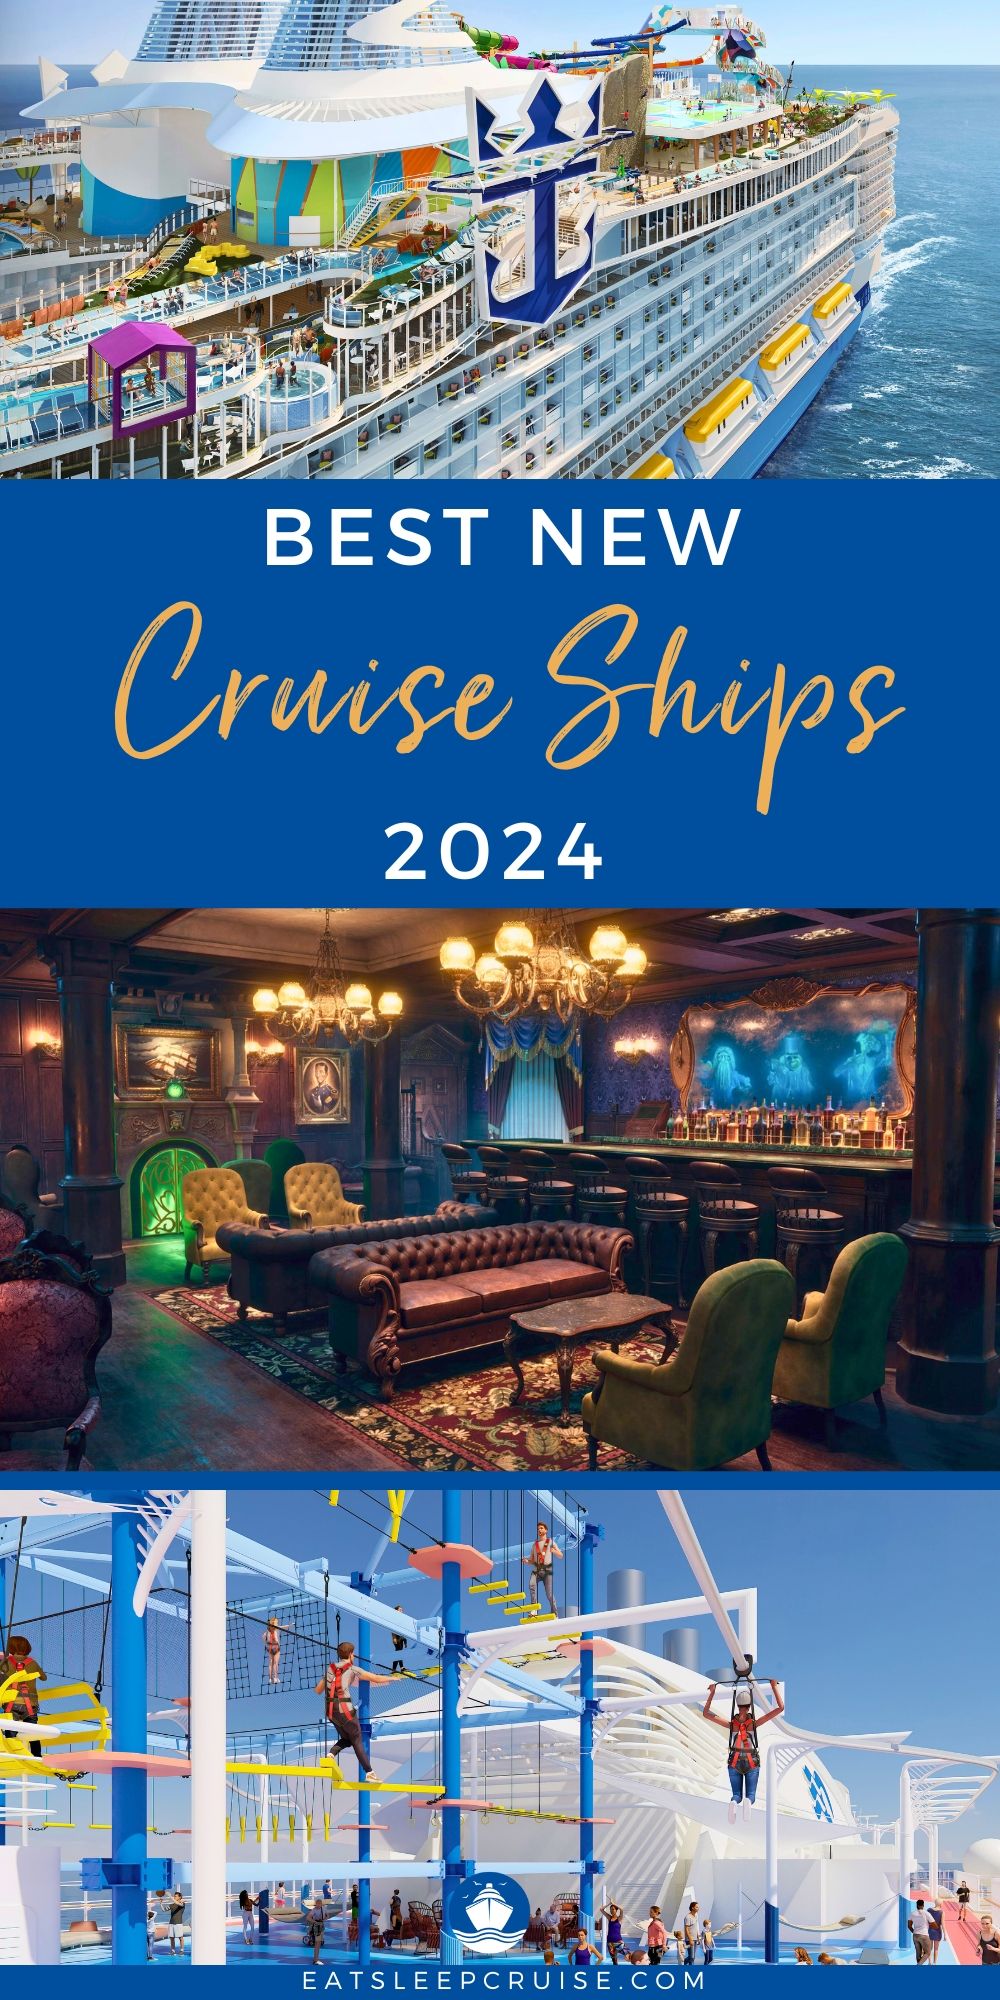 Best New Cruise Ships in 2024 1